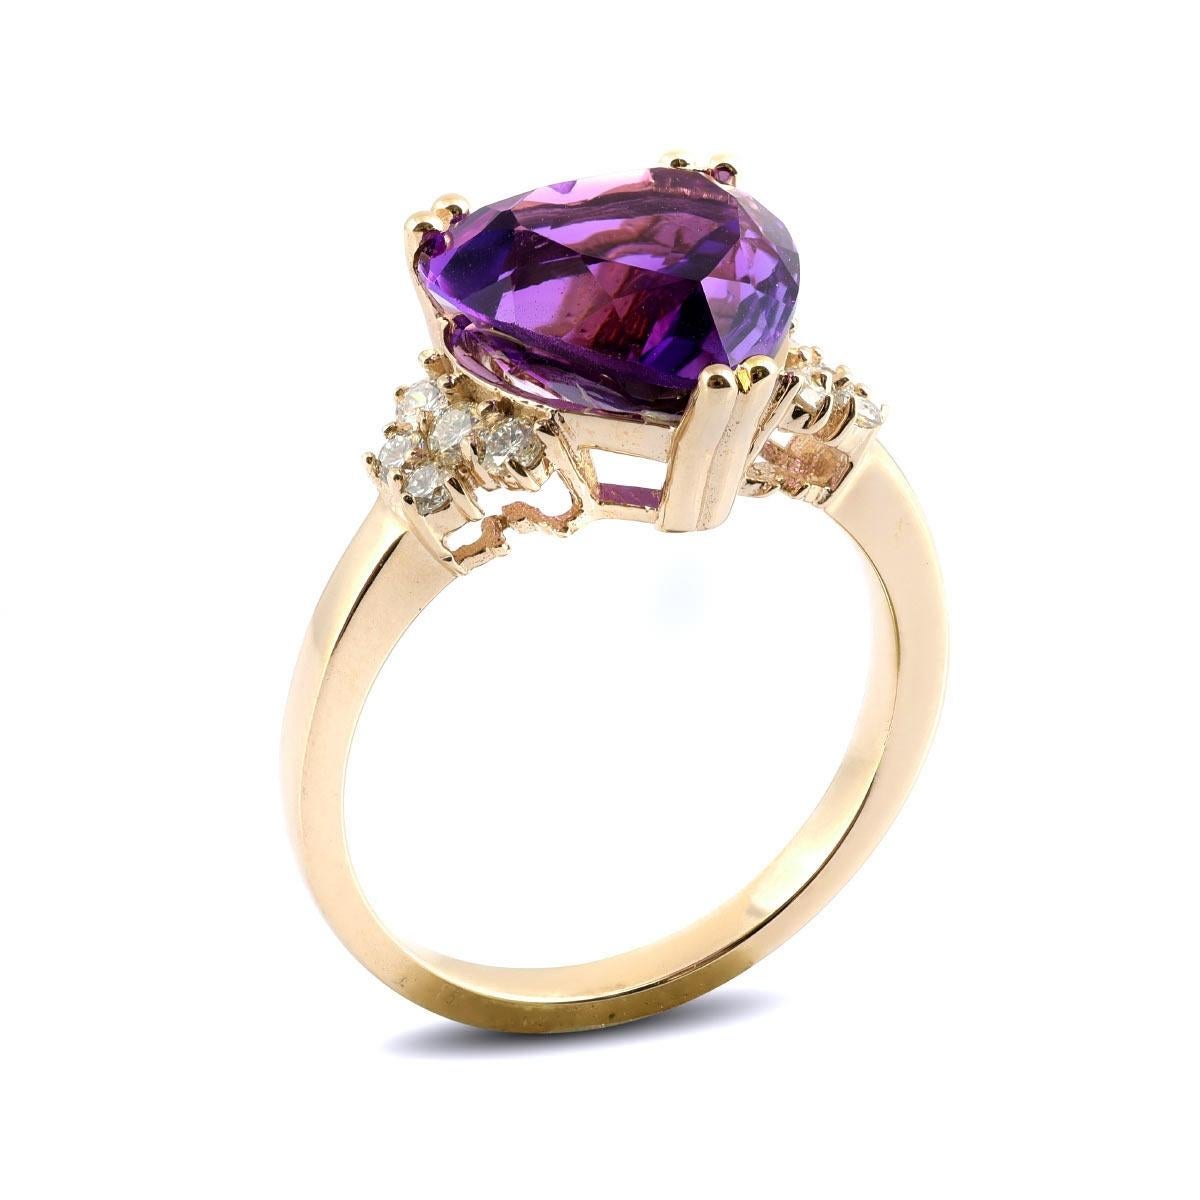 Here is an Amethyst ring you will love. Set with a natural gem that has the most exotic purple hues, it comes together with the 14K yellow gold holding the gems in place. Paired with immaculate diamonds that accentuate the ring on either side there